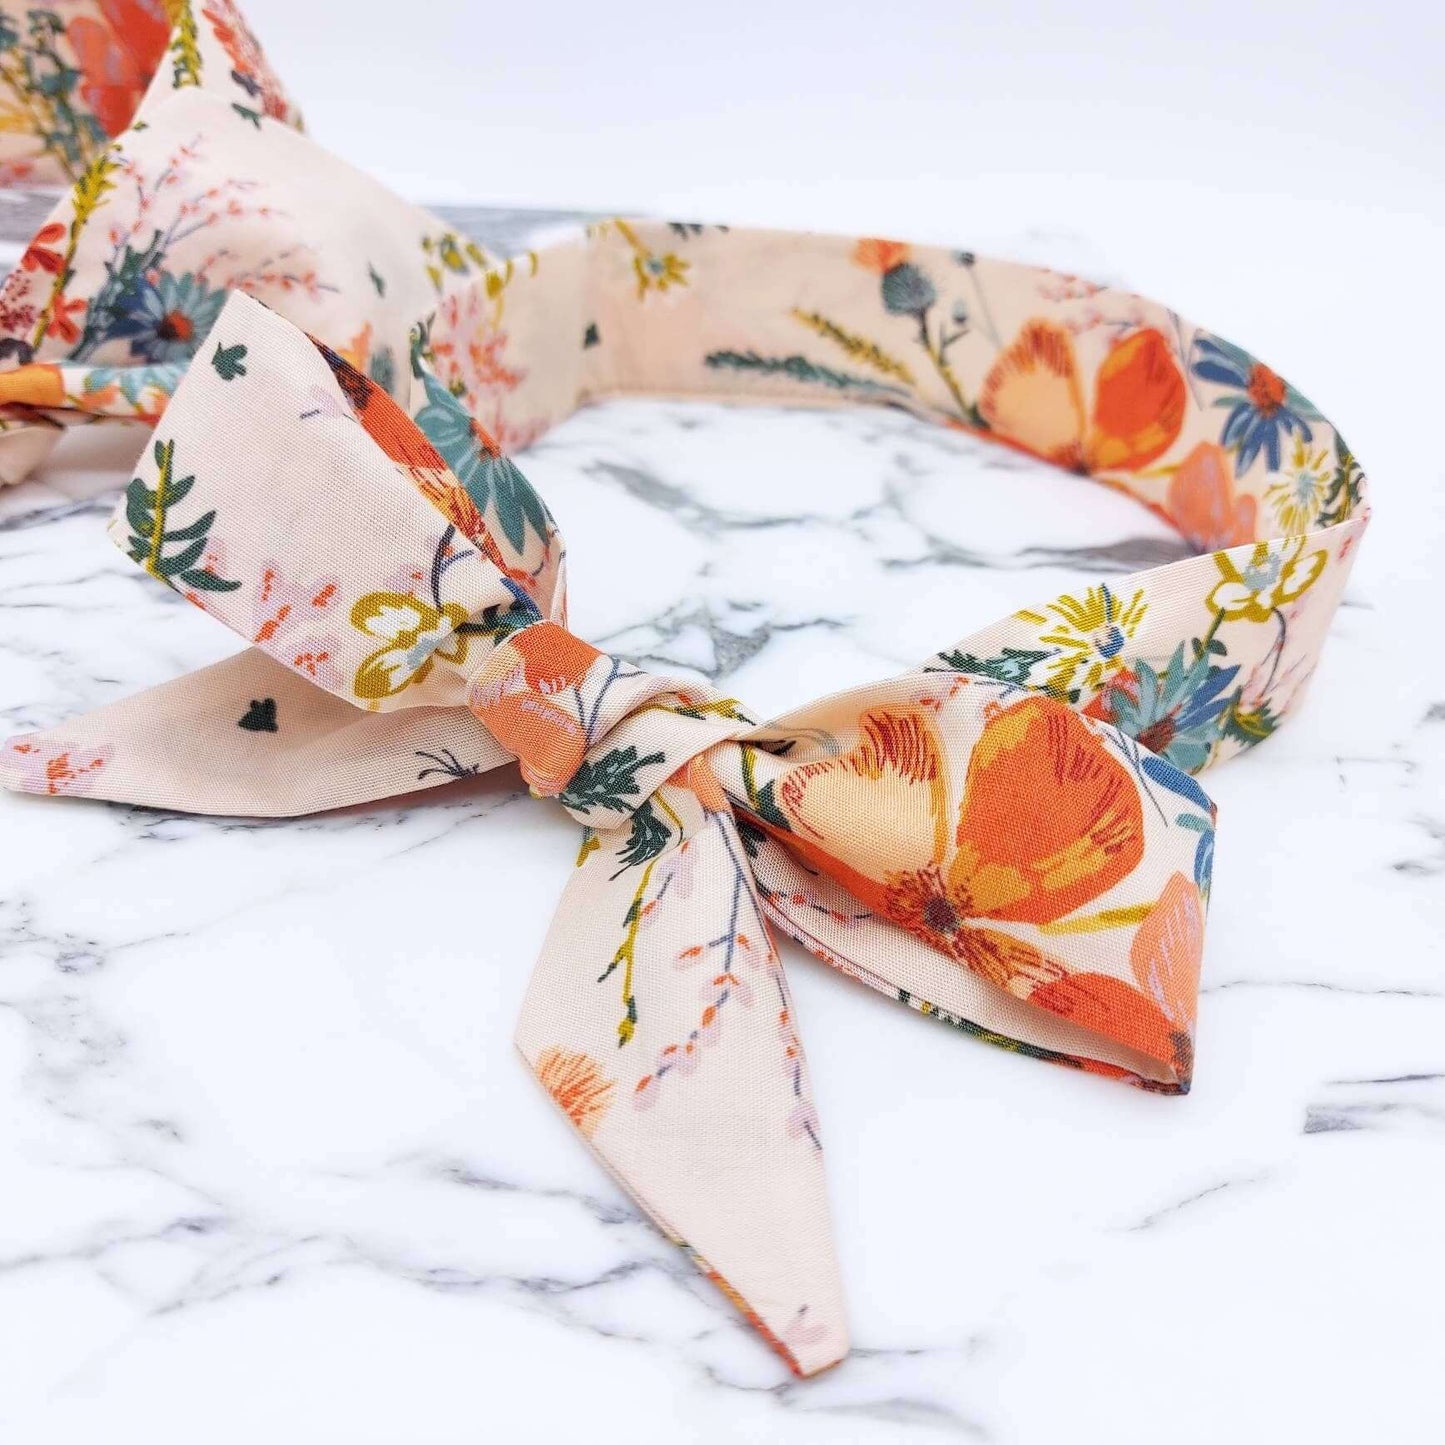 A summery cream, floral cotton headscarf with blue and orange flowers, tied in a pretty bow.